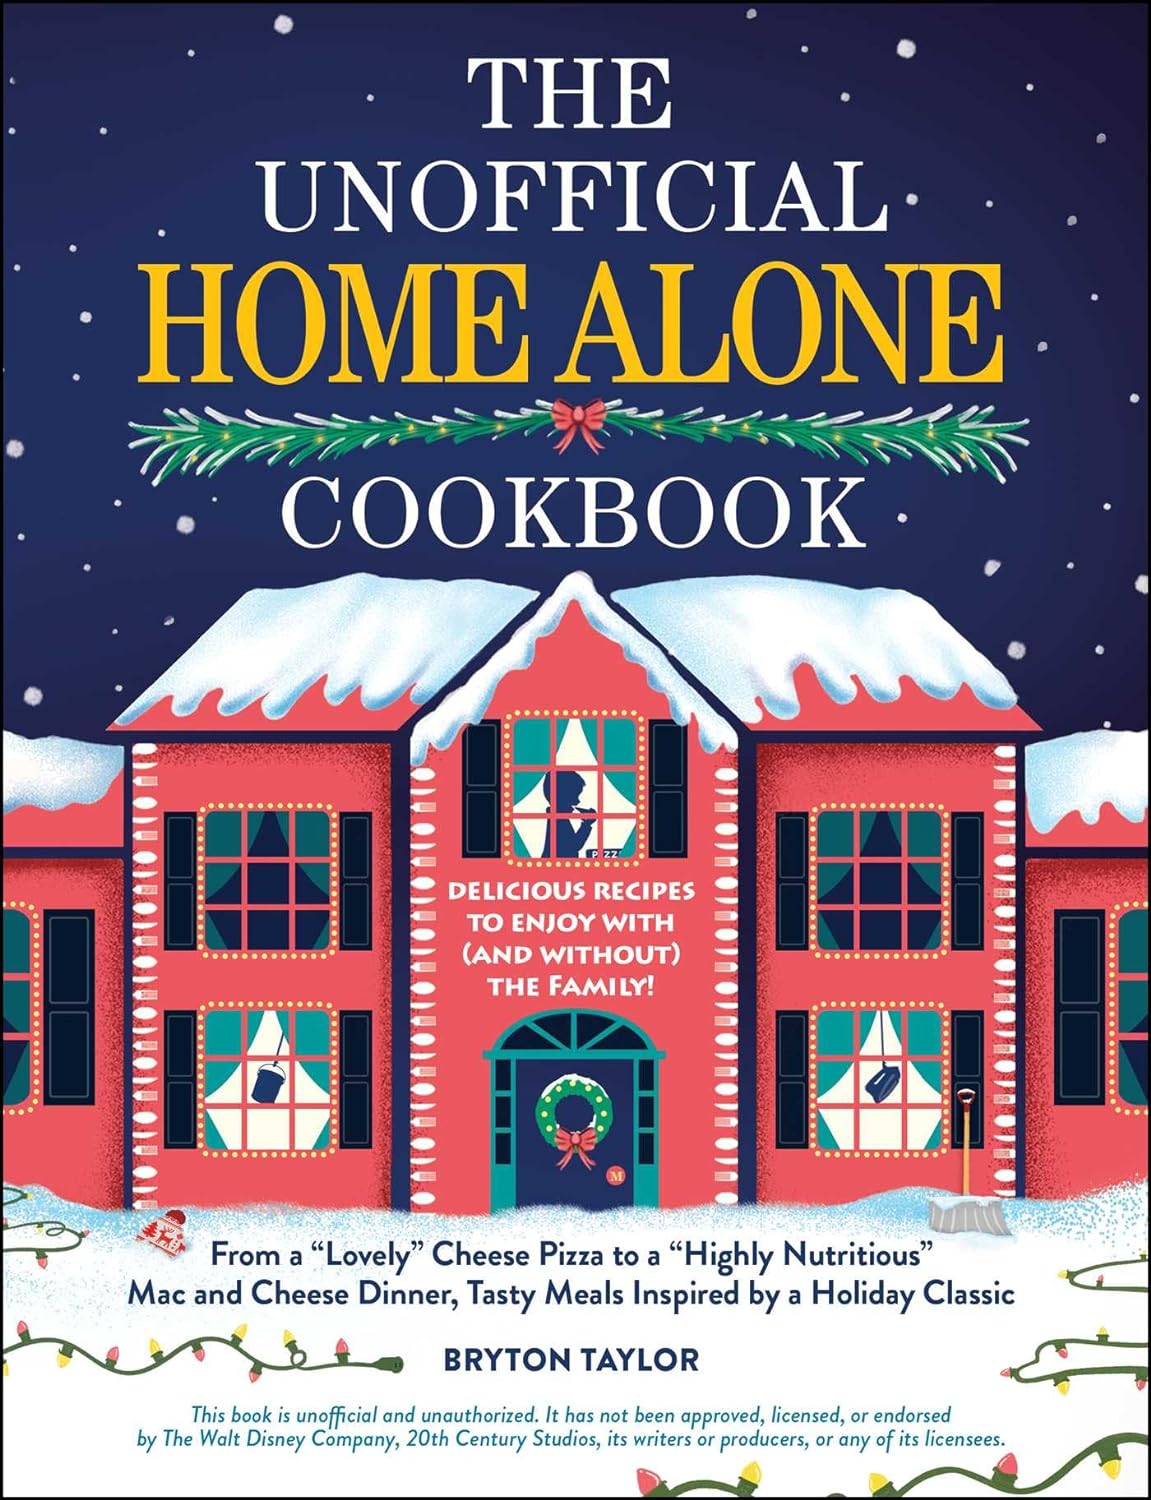 The Unofficial Home Alone Cookbook (Adams Media, 2023) by Bryton Taylor. #homealonemovie